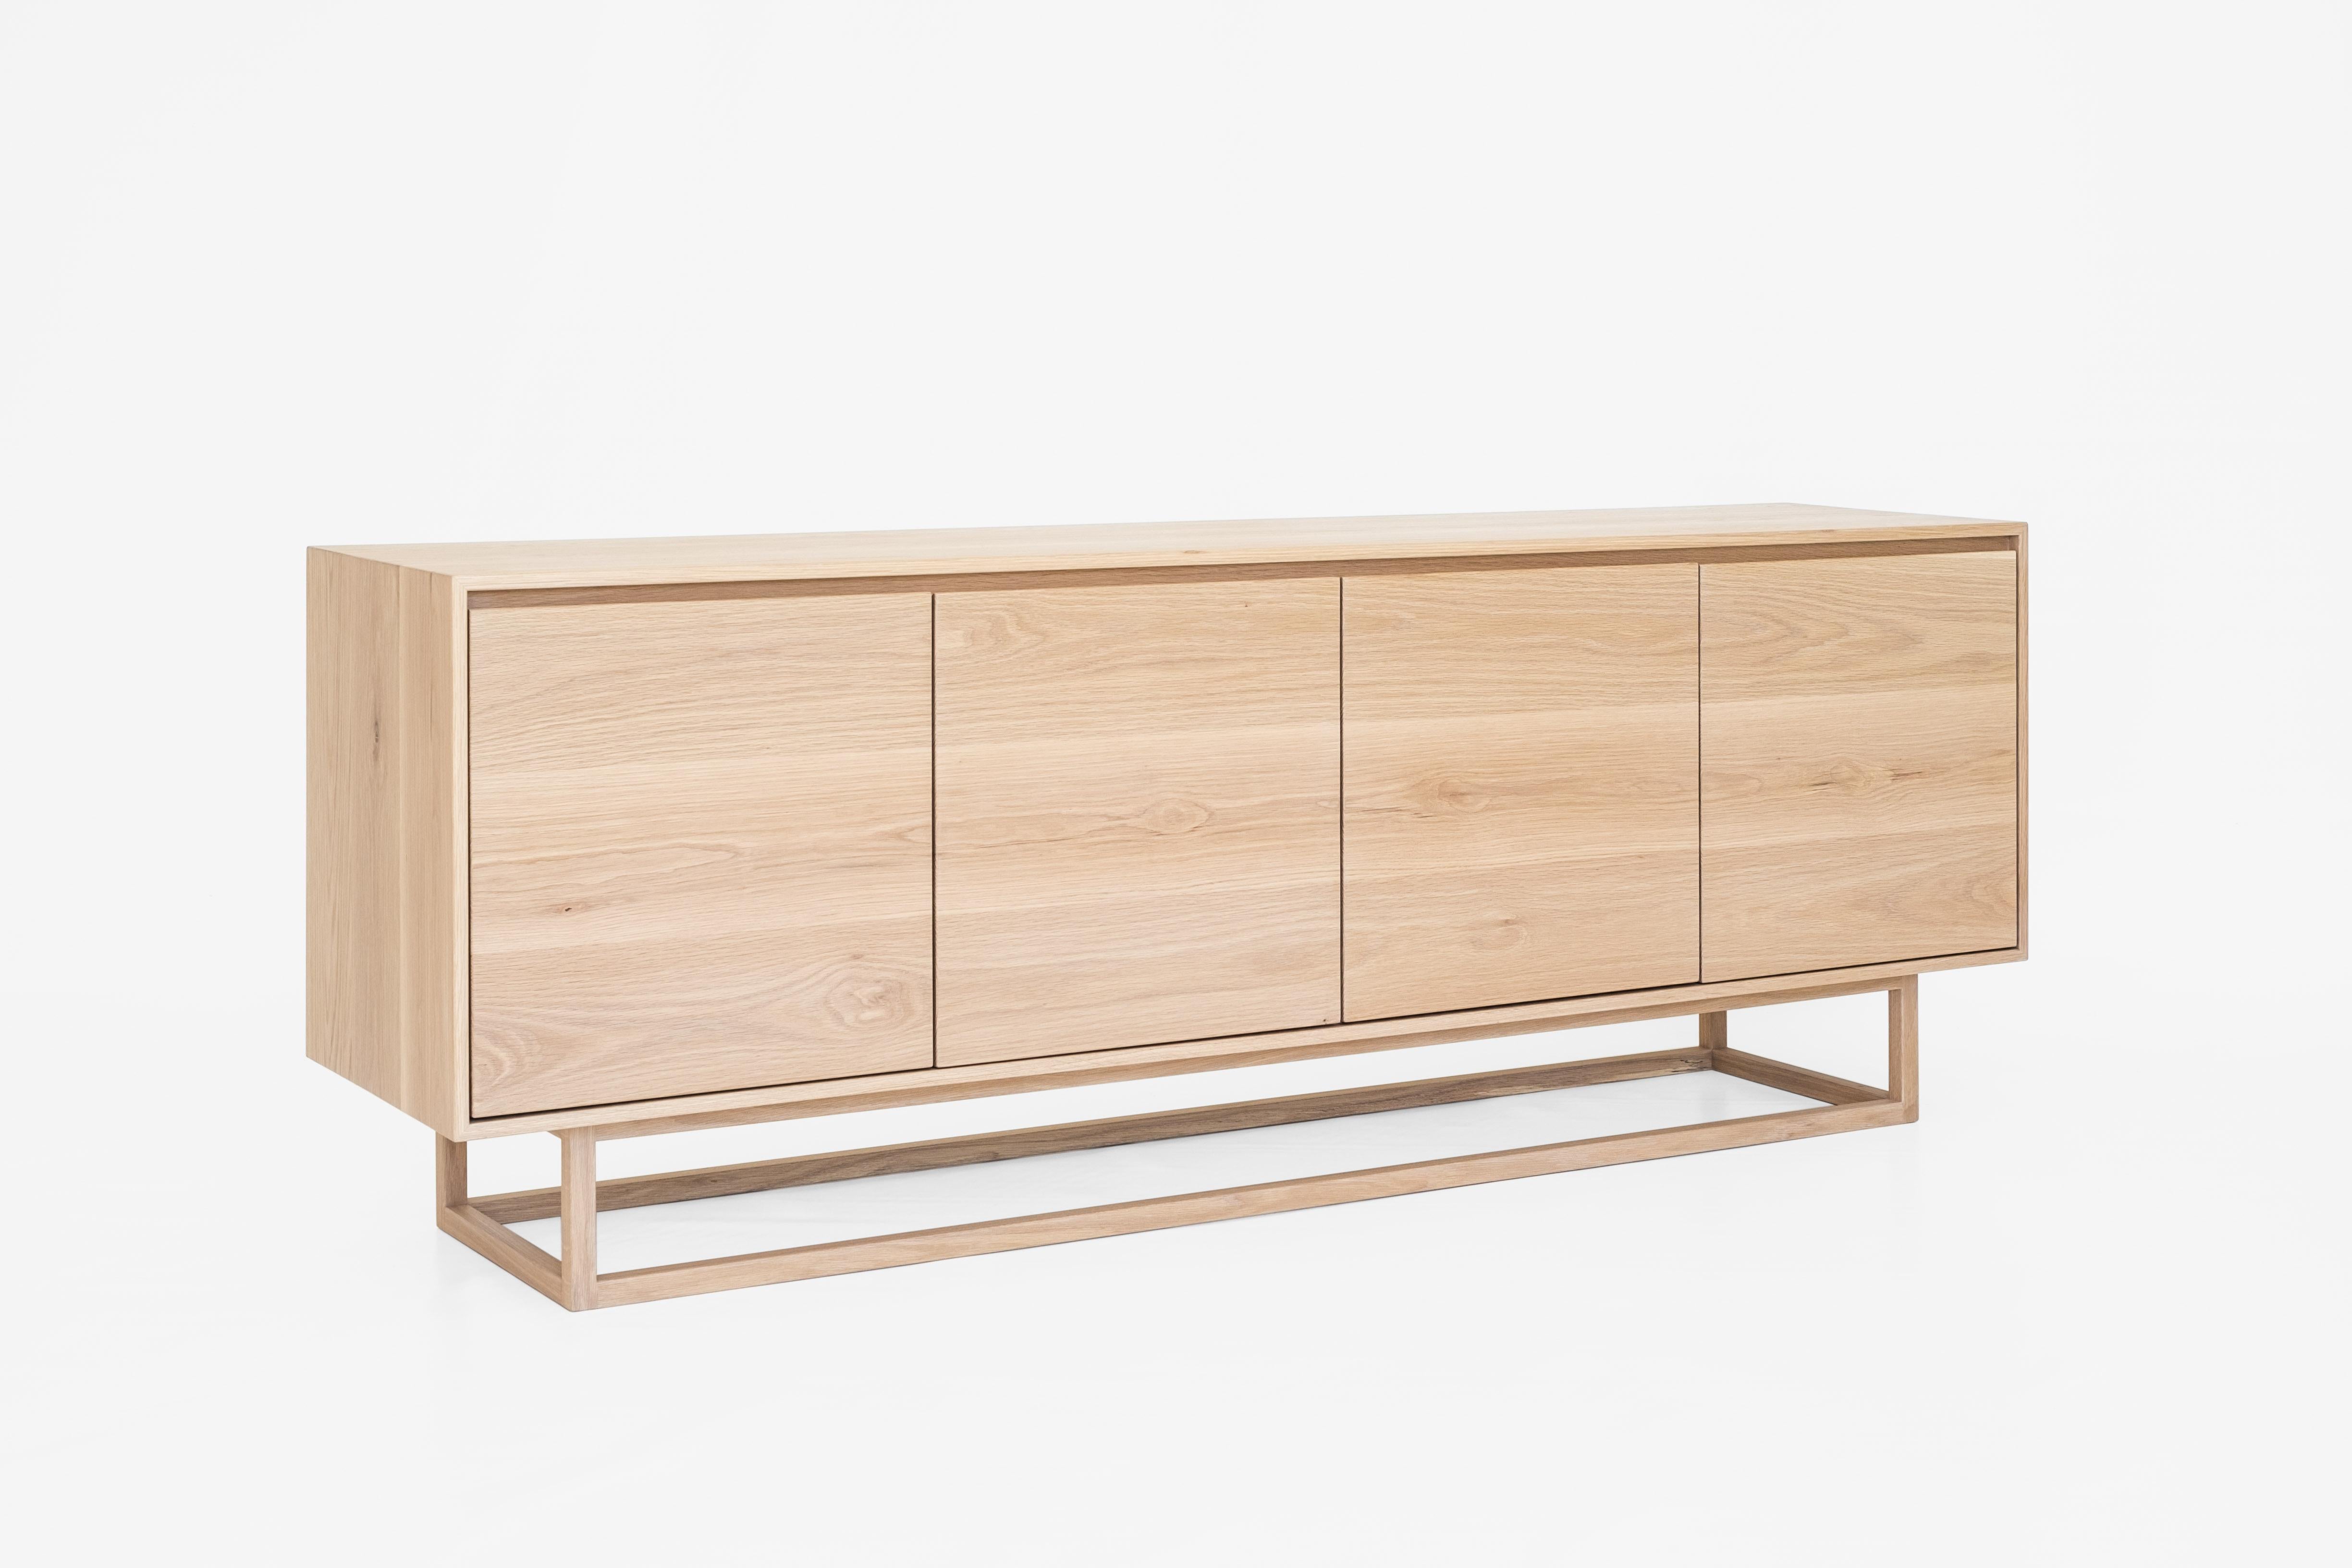 The Mr and Mrs White Atelier sideboard is a beautiful storage solution. A minimalist style, pictured here featuring a solid American white oak unit sitting on a box style frame. The continuous grain detail on the cupboard doors makes each sideboard